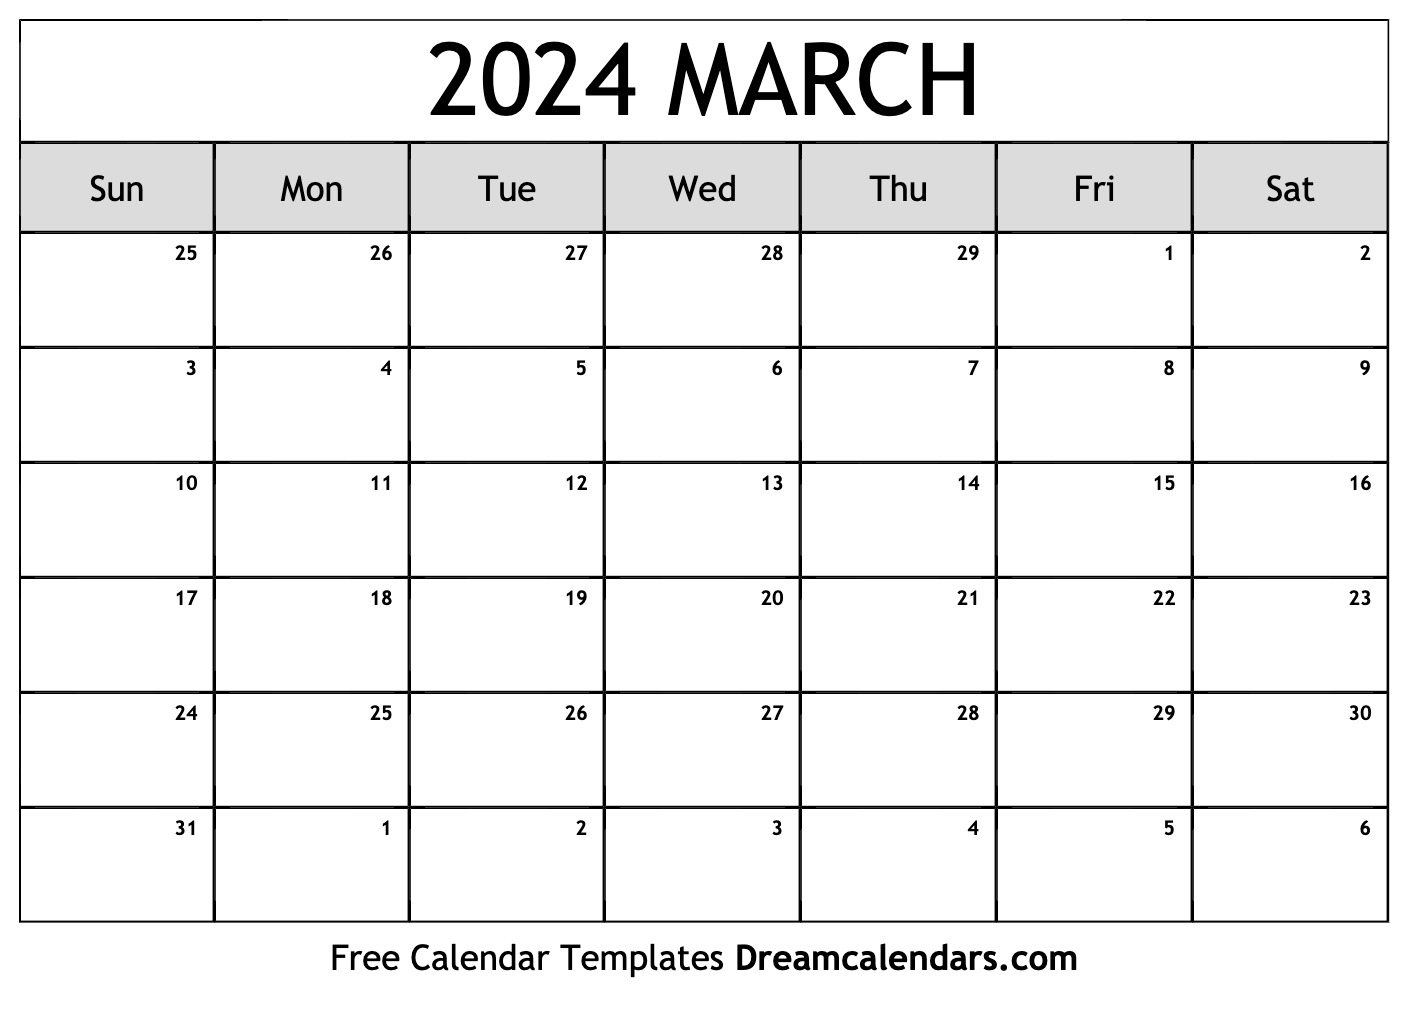 March 2024 Calendar | Free Blank Printable With Holidays for Calendar Template March 2024 Printable